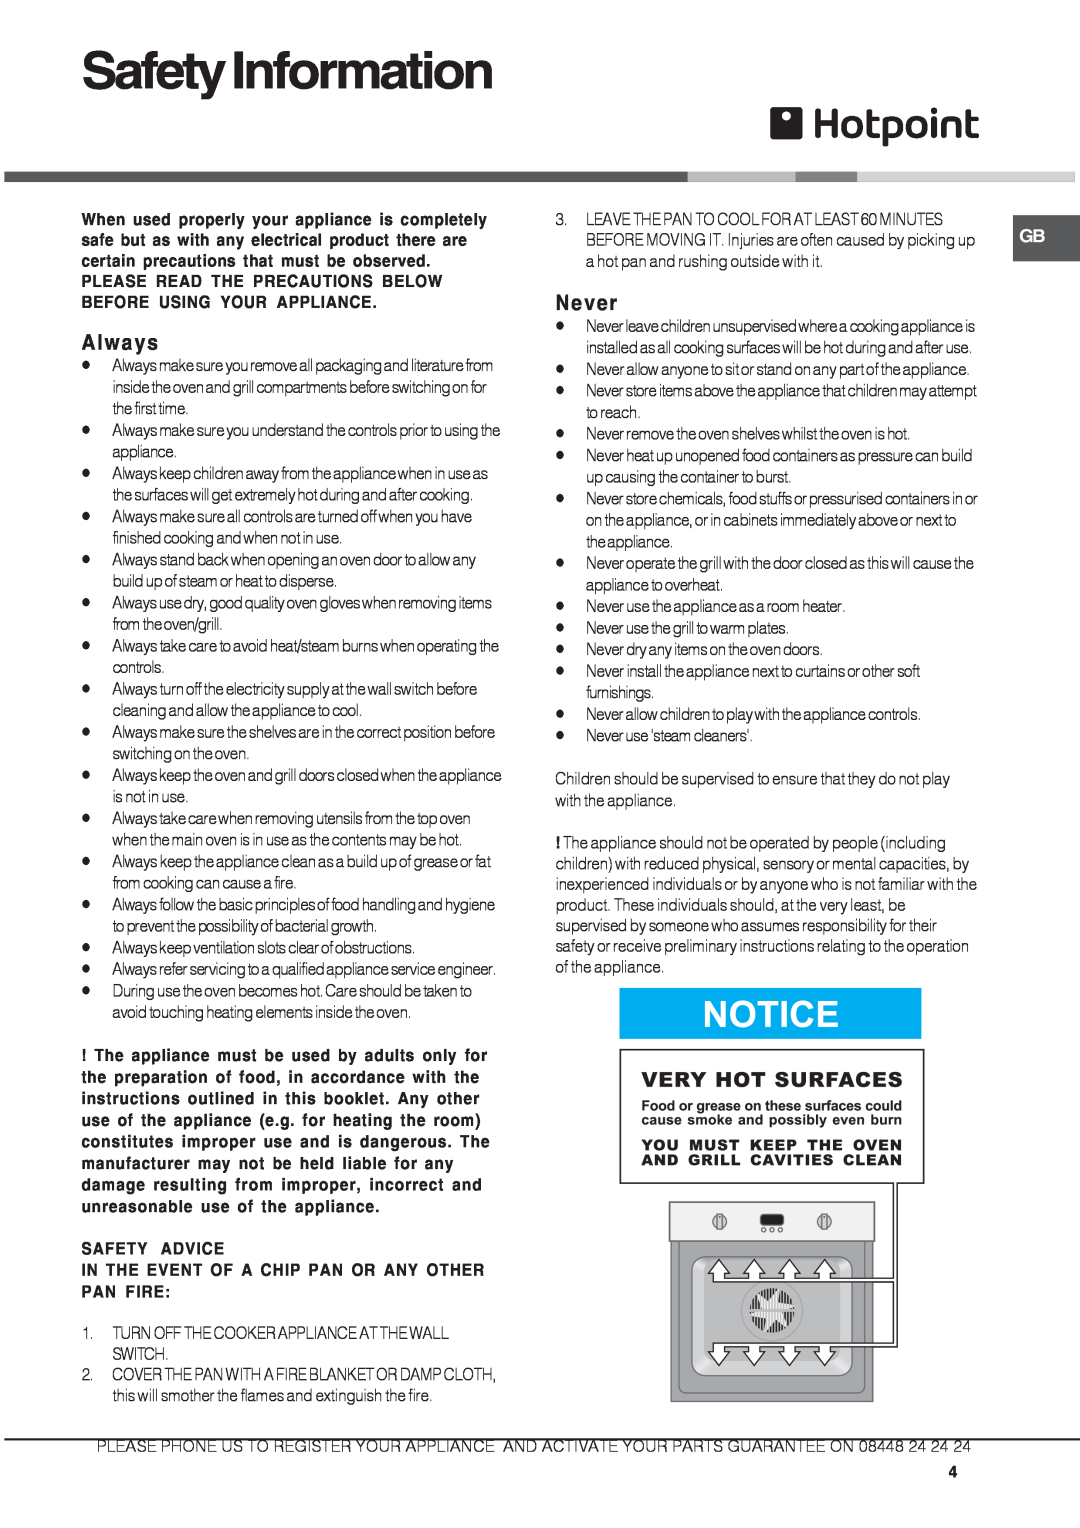 Hotpoint DX 1032 CX manual SafetyInformation, Always, Never, Please Read The Precautions Below Before Using Your Appliance 